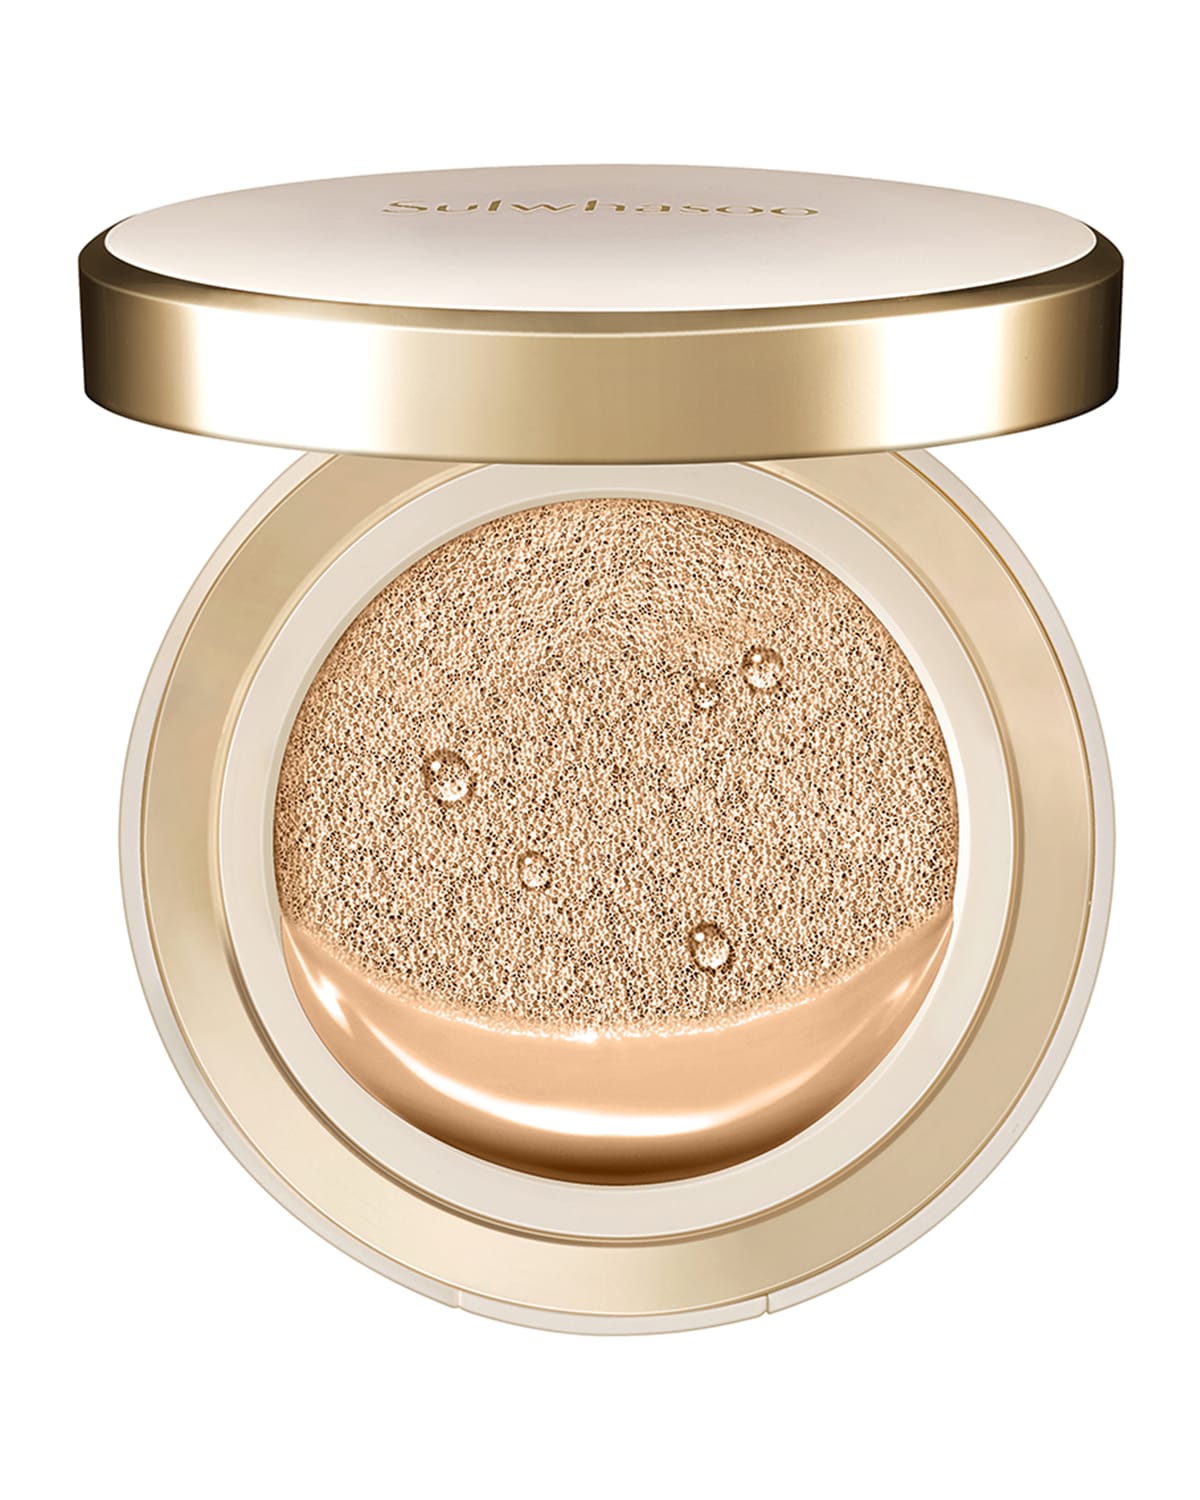 Sulwhasoo Perfecting Cushion In Neutral